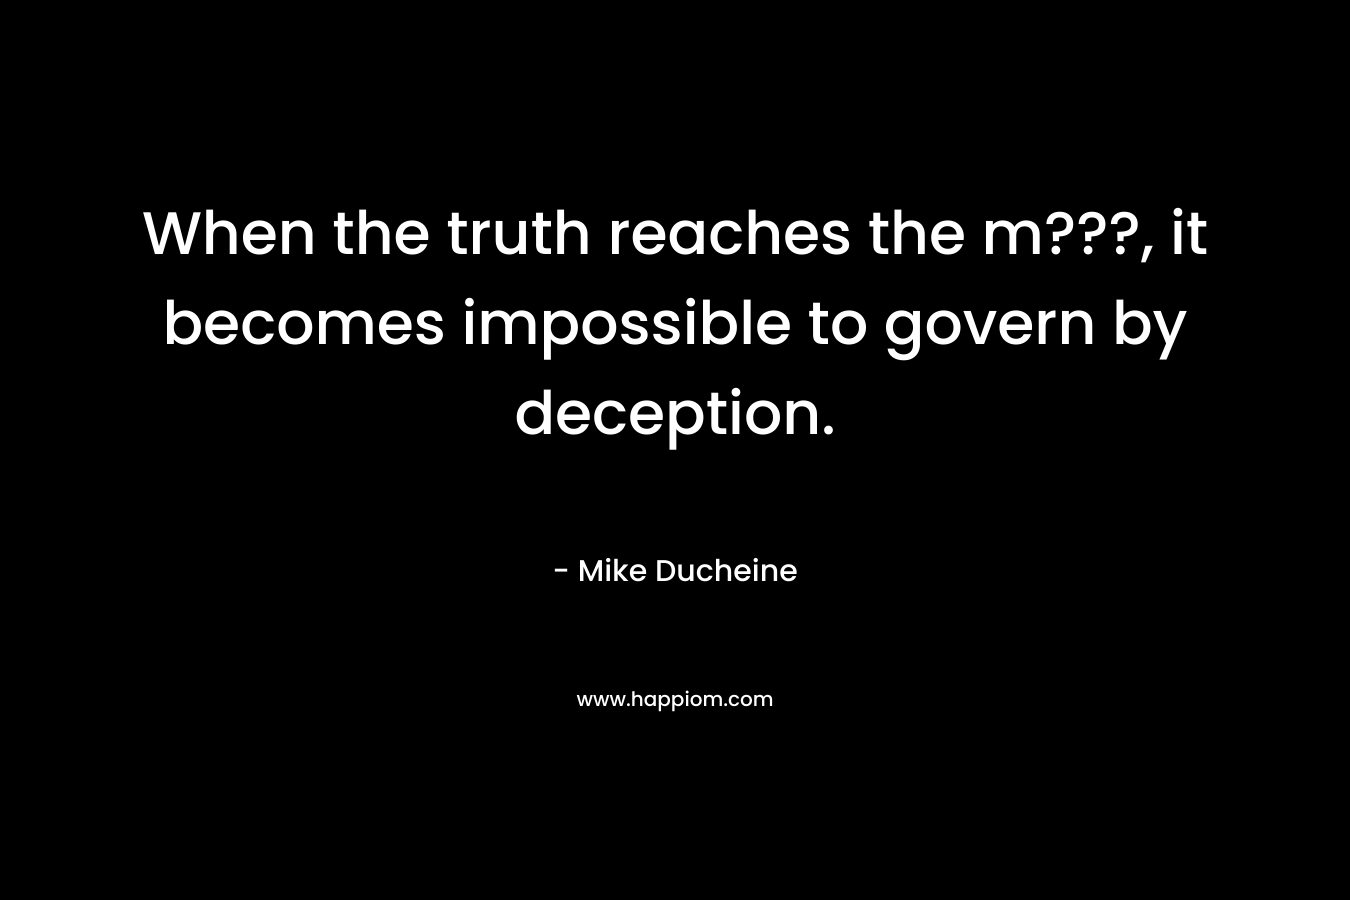 When the truth reaches the m???, it becomes impossible to govern by deception.